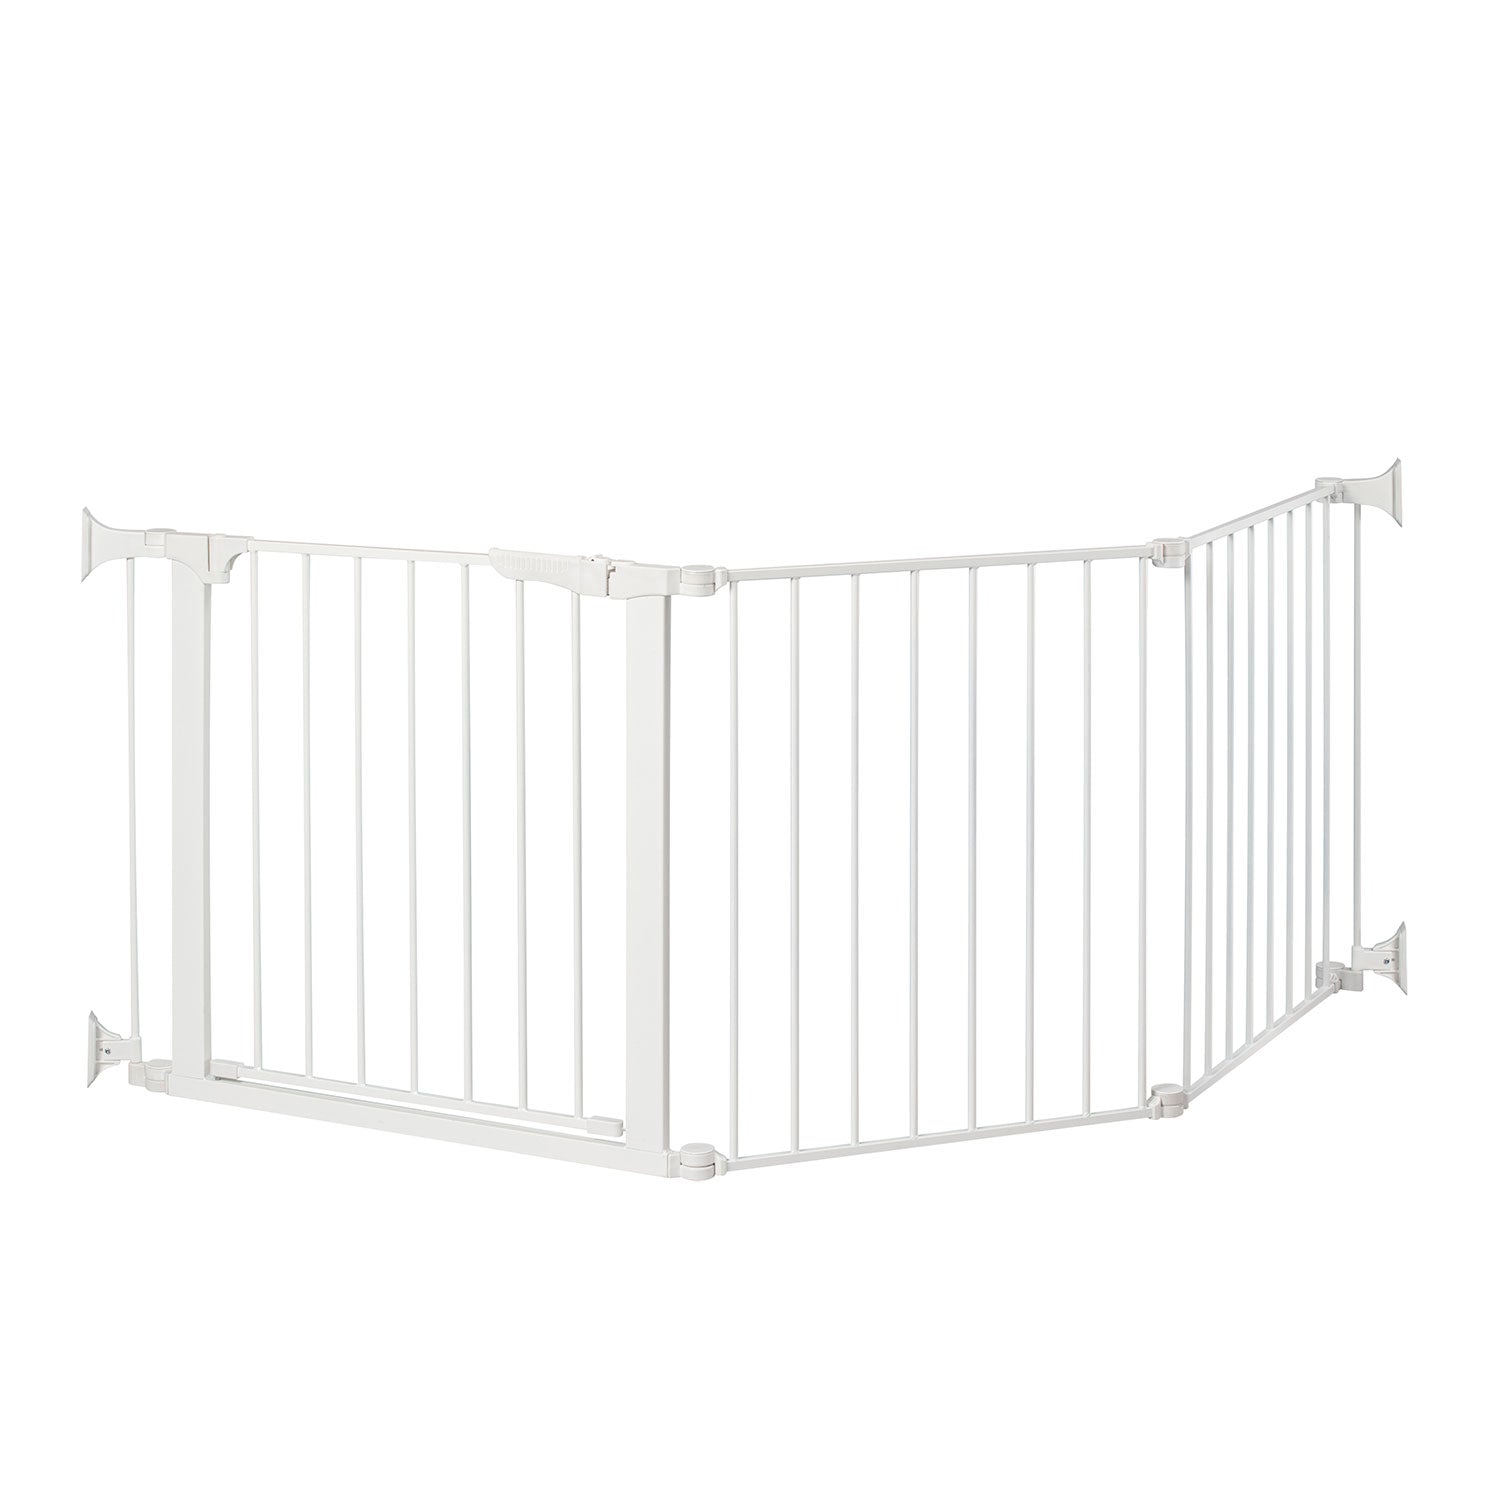 Kidco Pg5300 Command Custom Fit Free Standing Pet Gate